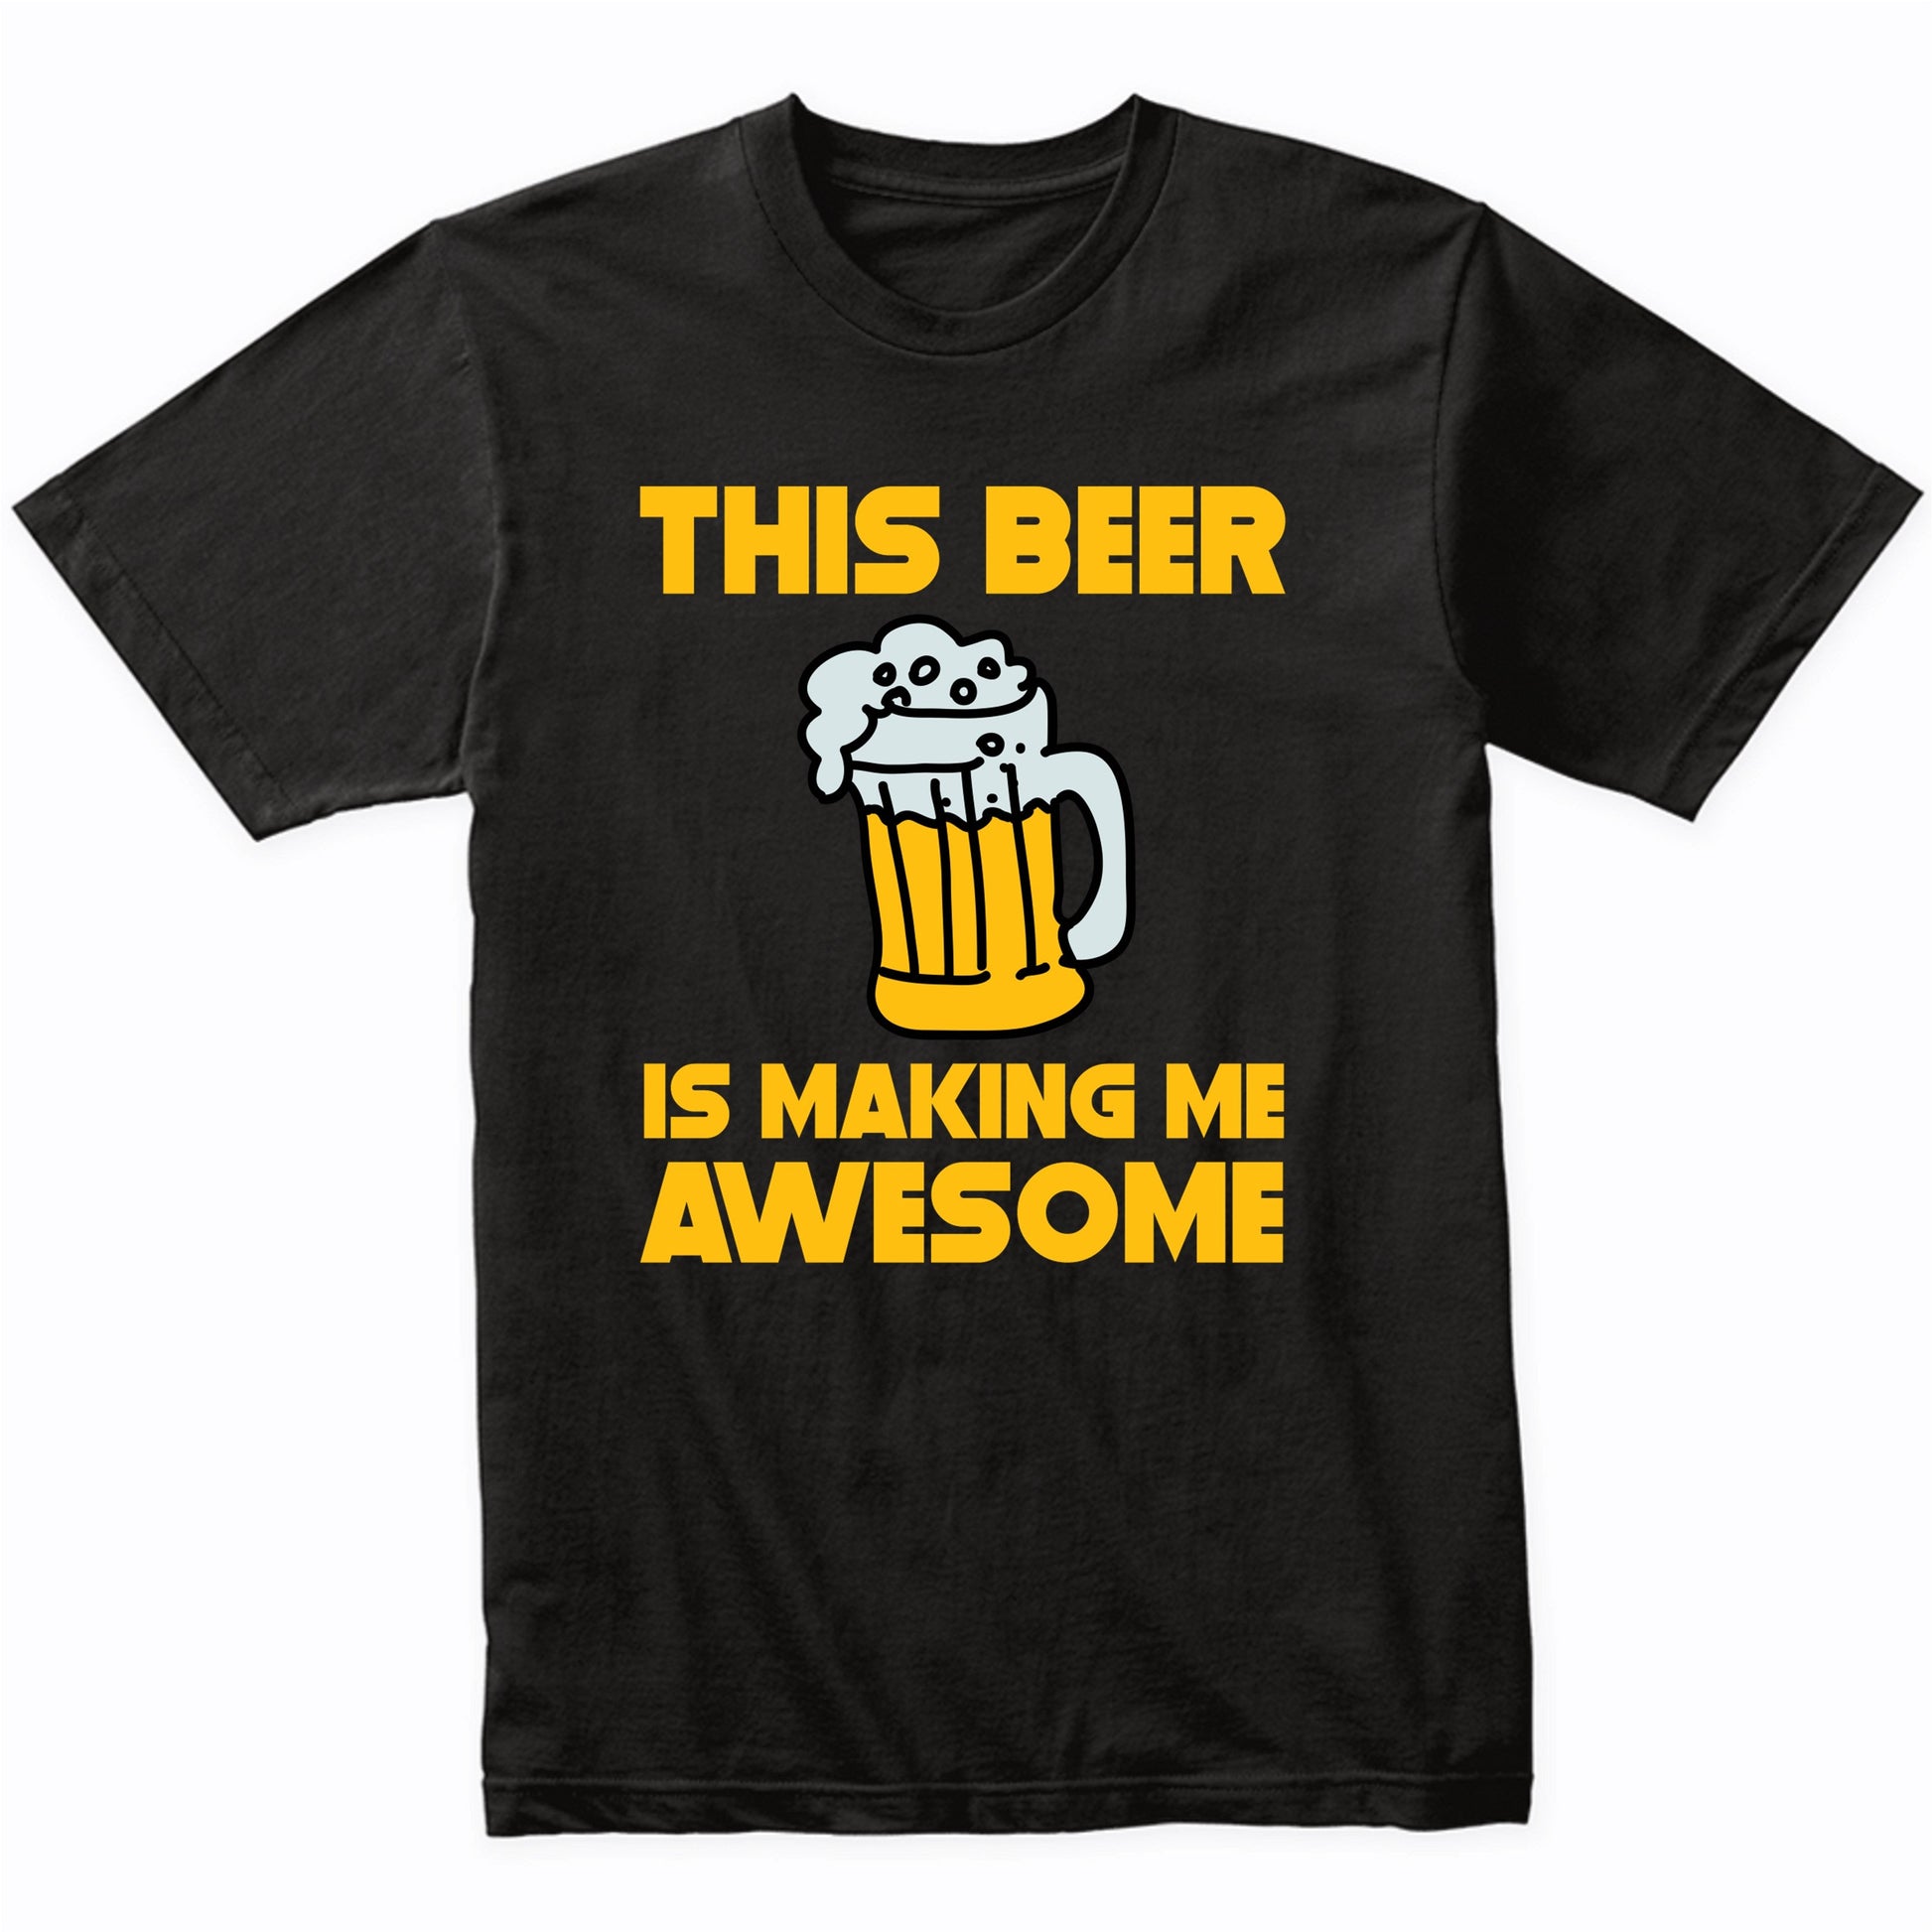 This Beer Is Making Me Awesome Funny Drinking Shirt